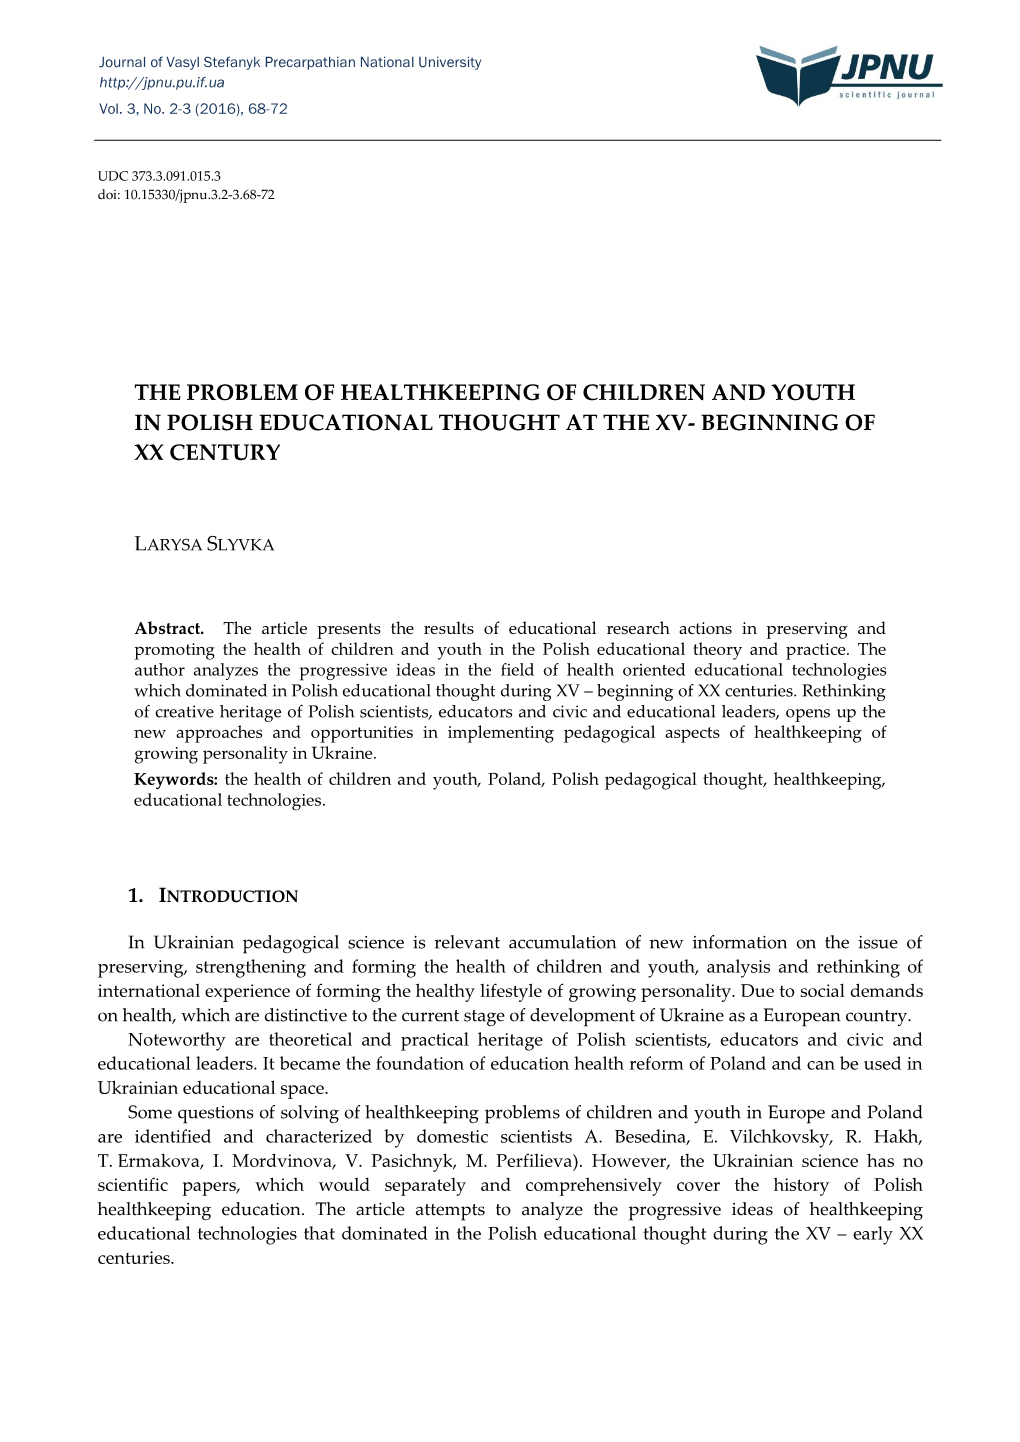 The Problem of Healthkeeping of Children and Youth in Polish Educational Thought at the Xv- Beginning of Xx Century